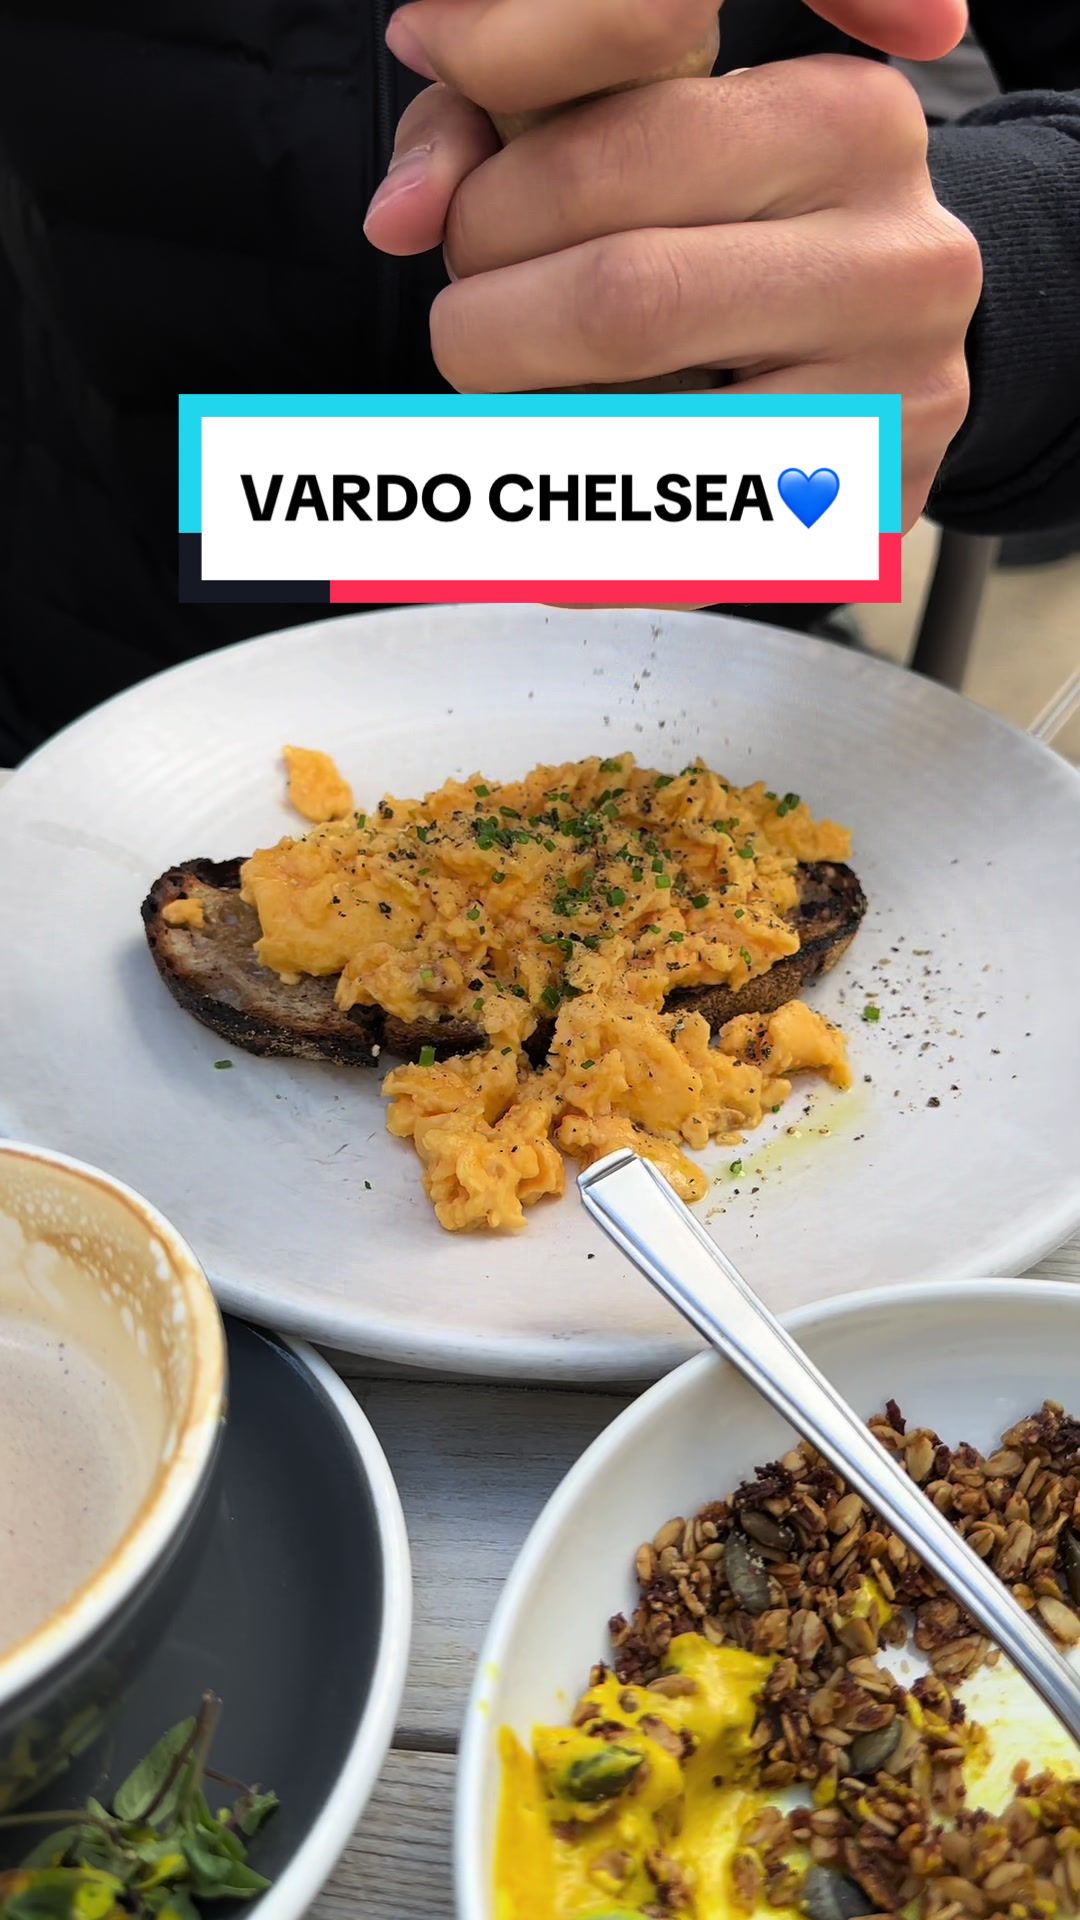 @gianandphil We visited #vardo in #chelsea this weekend and ordered some eggs on...